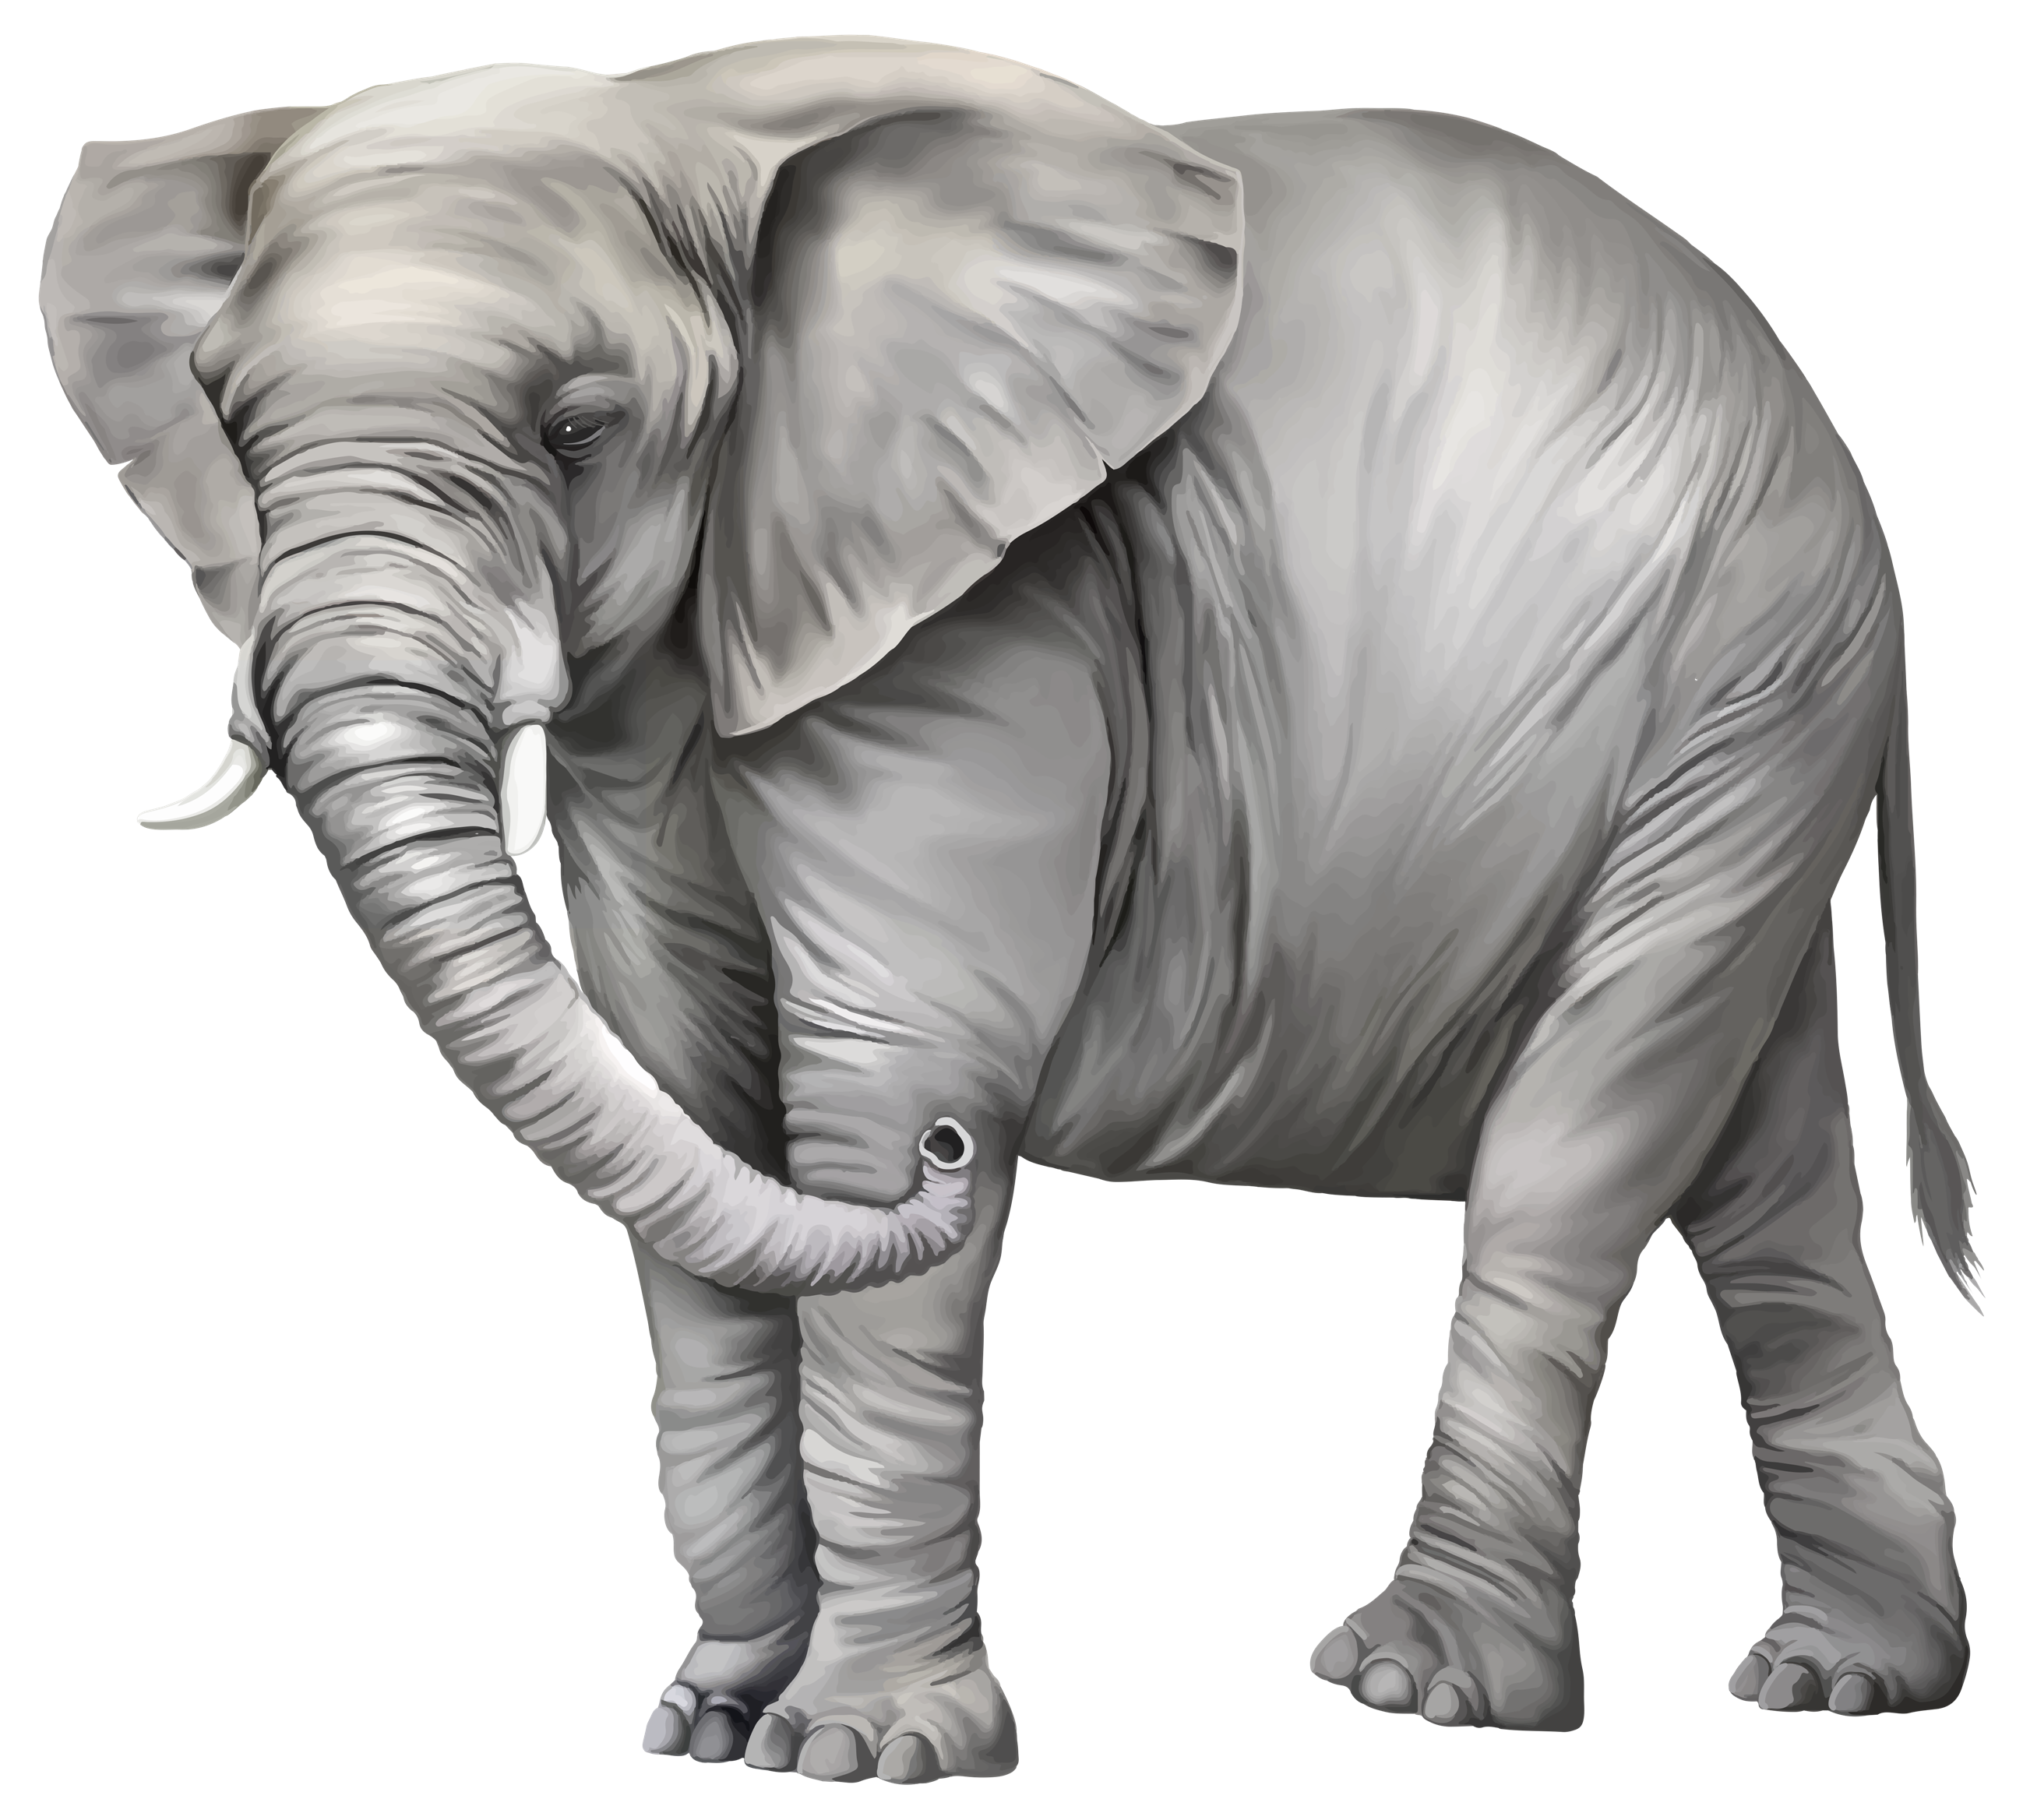 Elephant Clip art - Elephant PNG Photos png download - 2597*2337 - Free